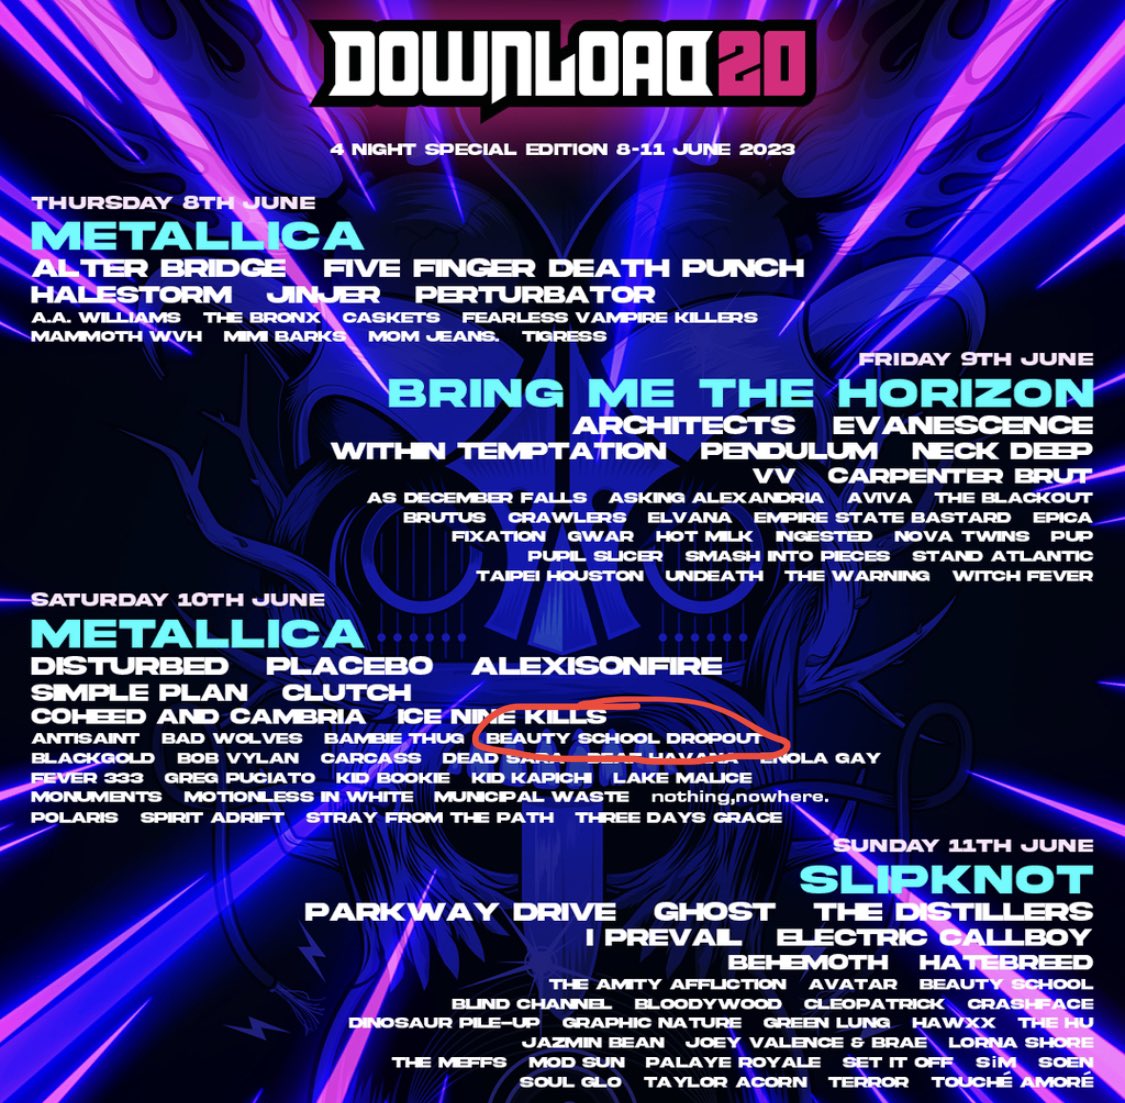 THIS SUMMER ABOUT TO BE LOUD✨ SEE U SOON @DownloadFest 🇬🇧 #DL20